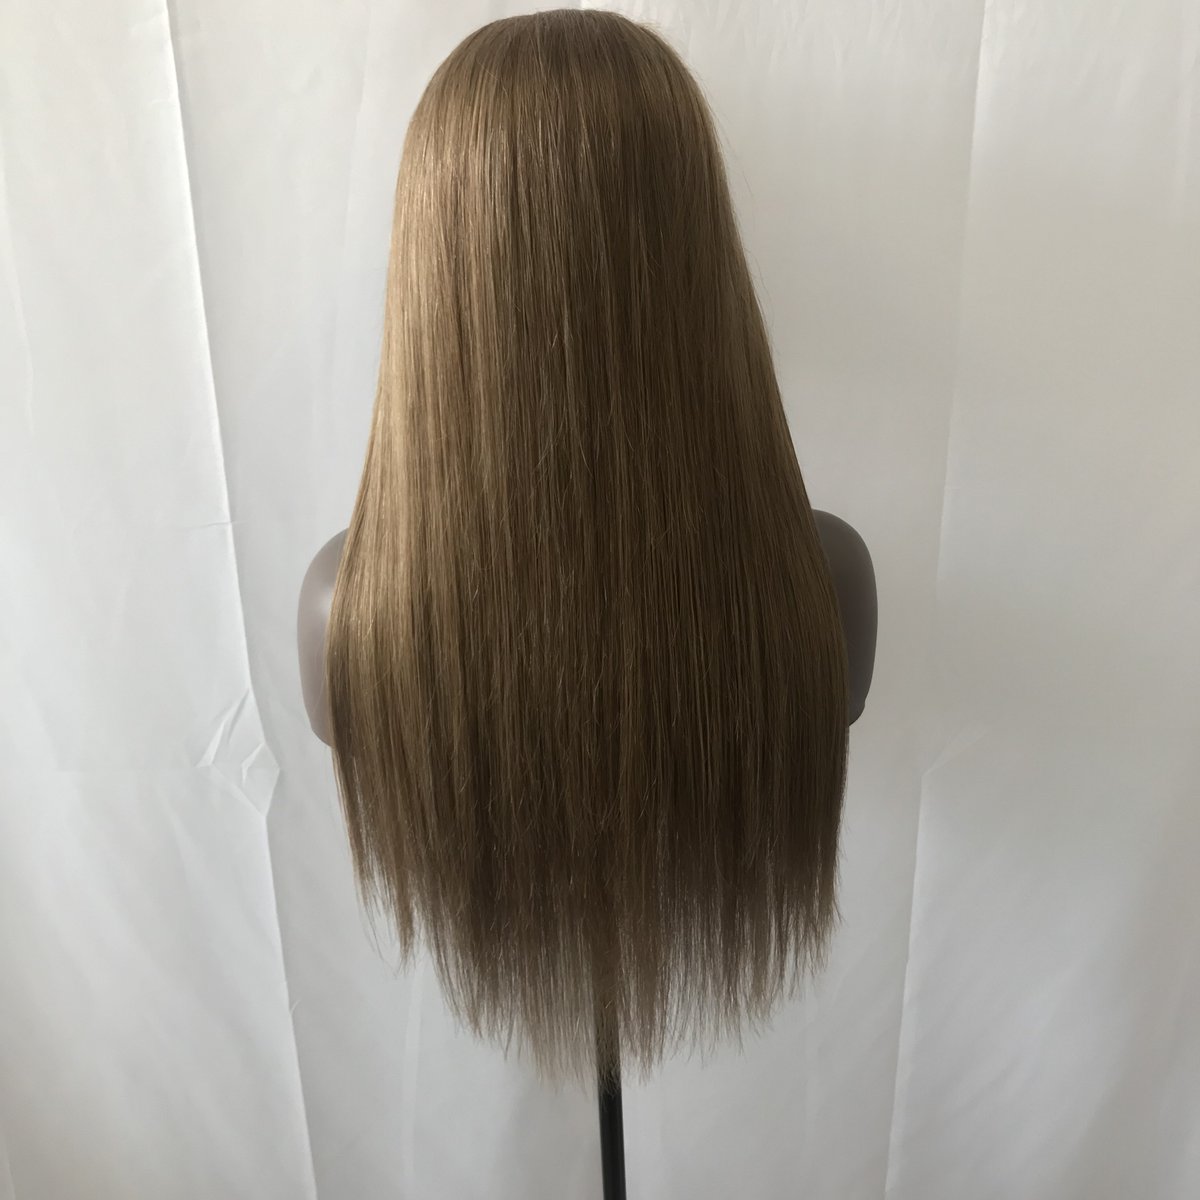 We make this wig for our customers.
#lacewig #lacefrontalwig #laceclosurewig #coloredhair